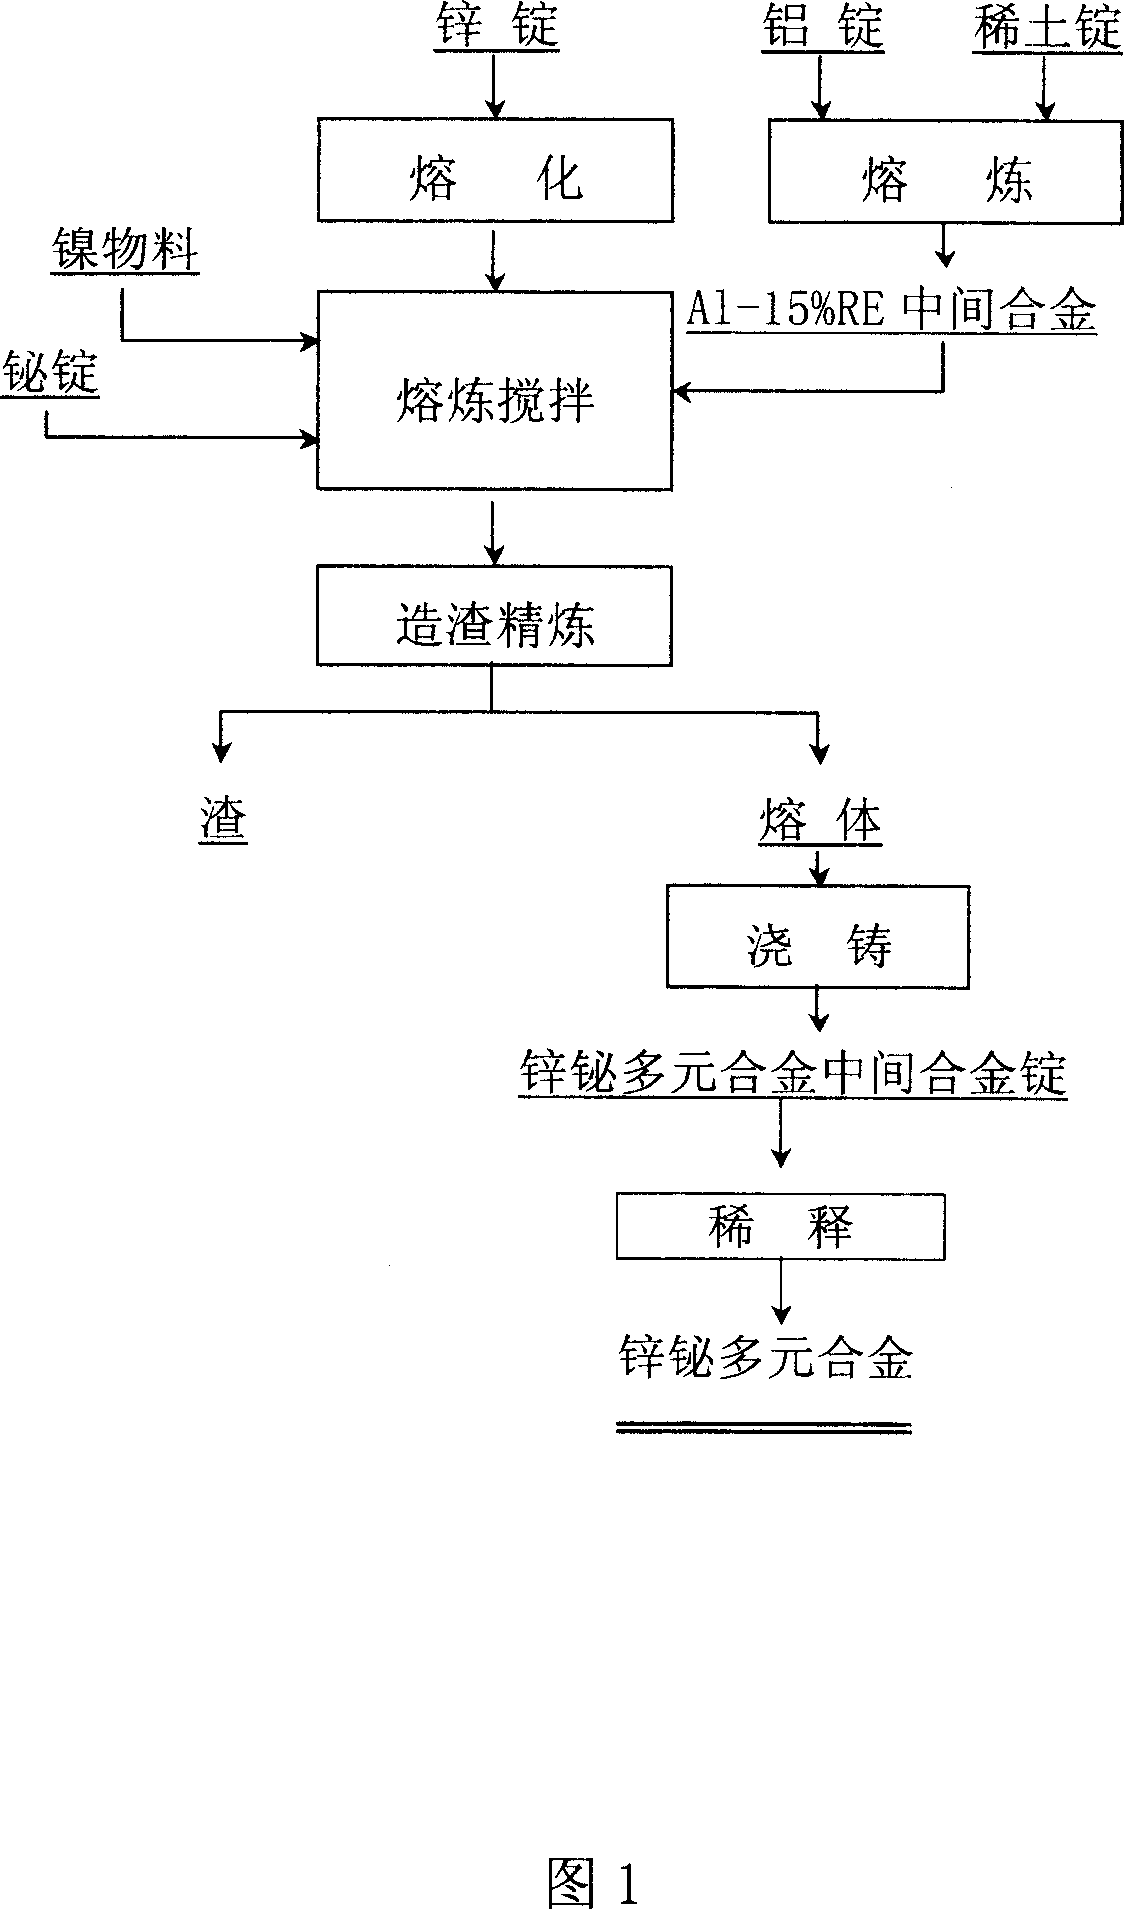 Method for producing zinc bismuth multicomponent alloy used for hot dip galvanizing of steel and iron members